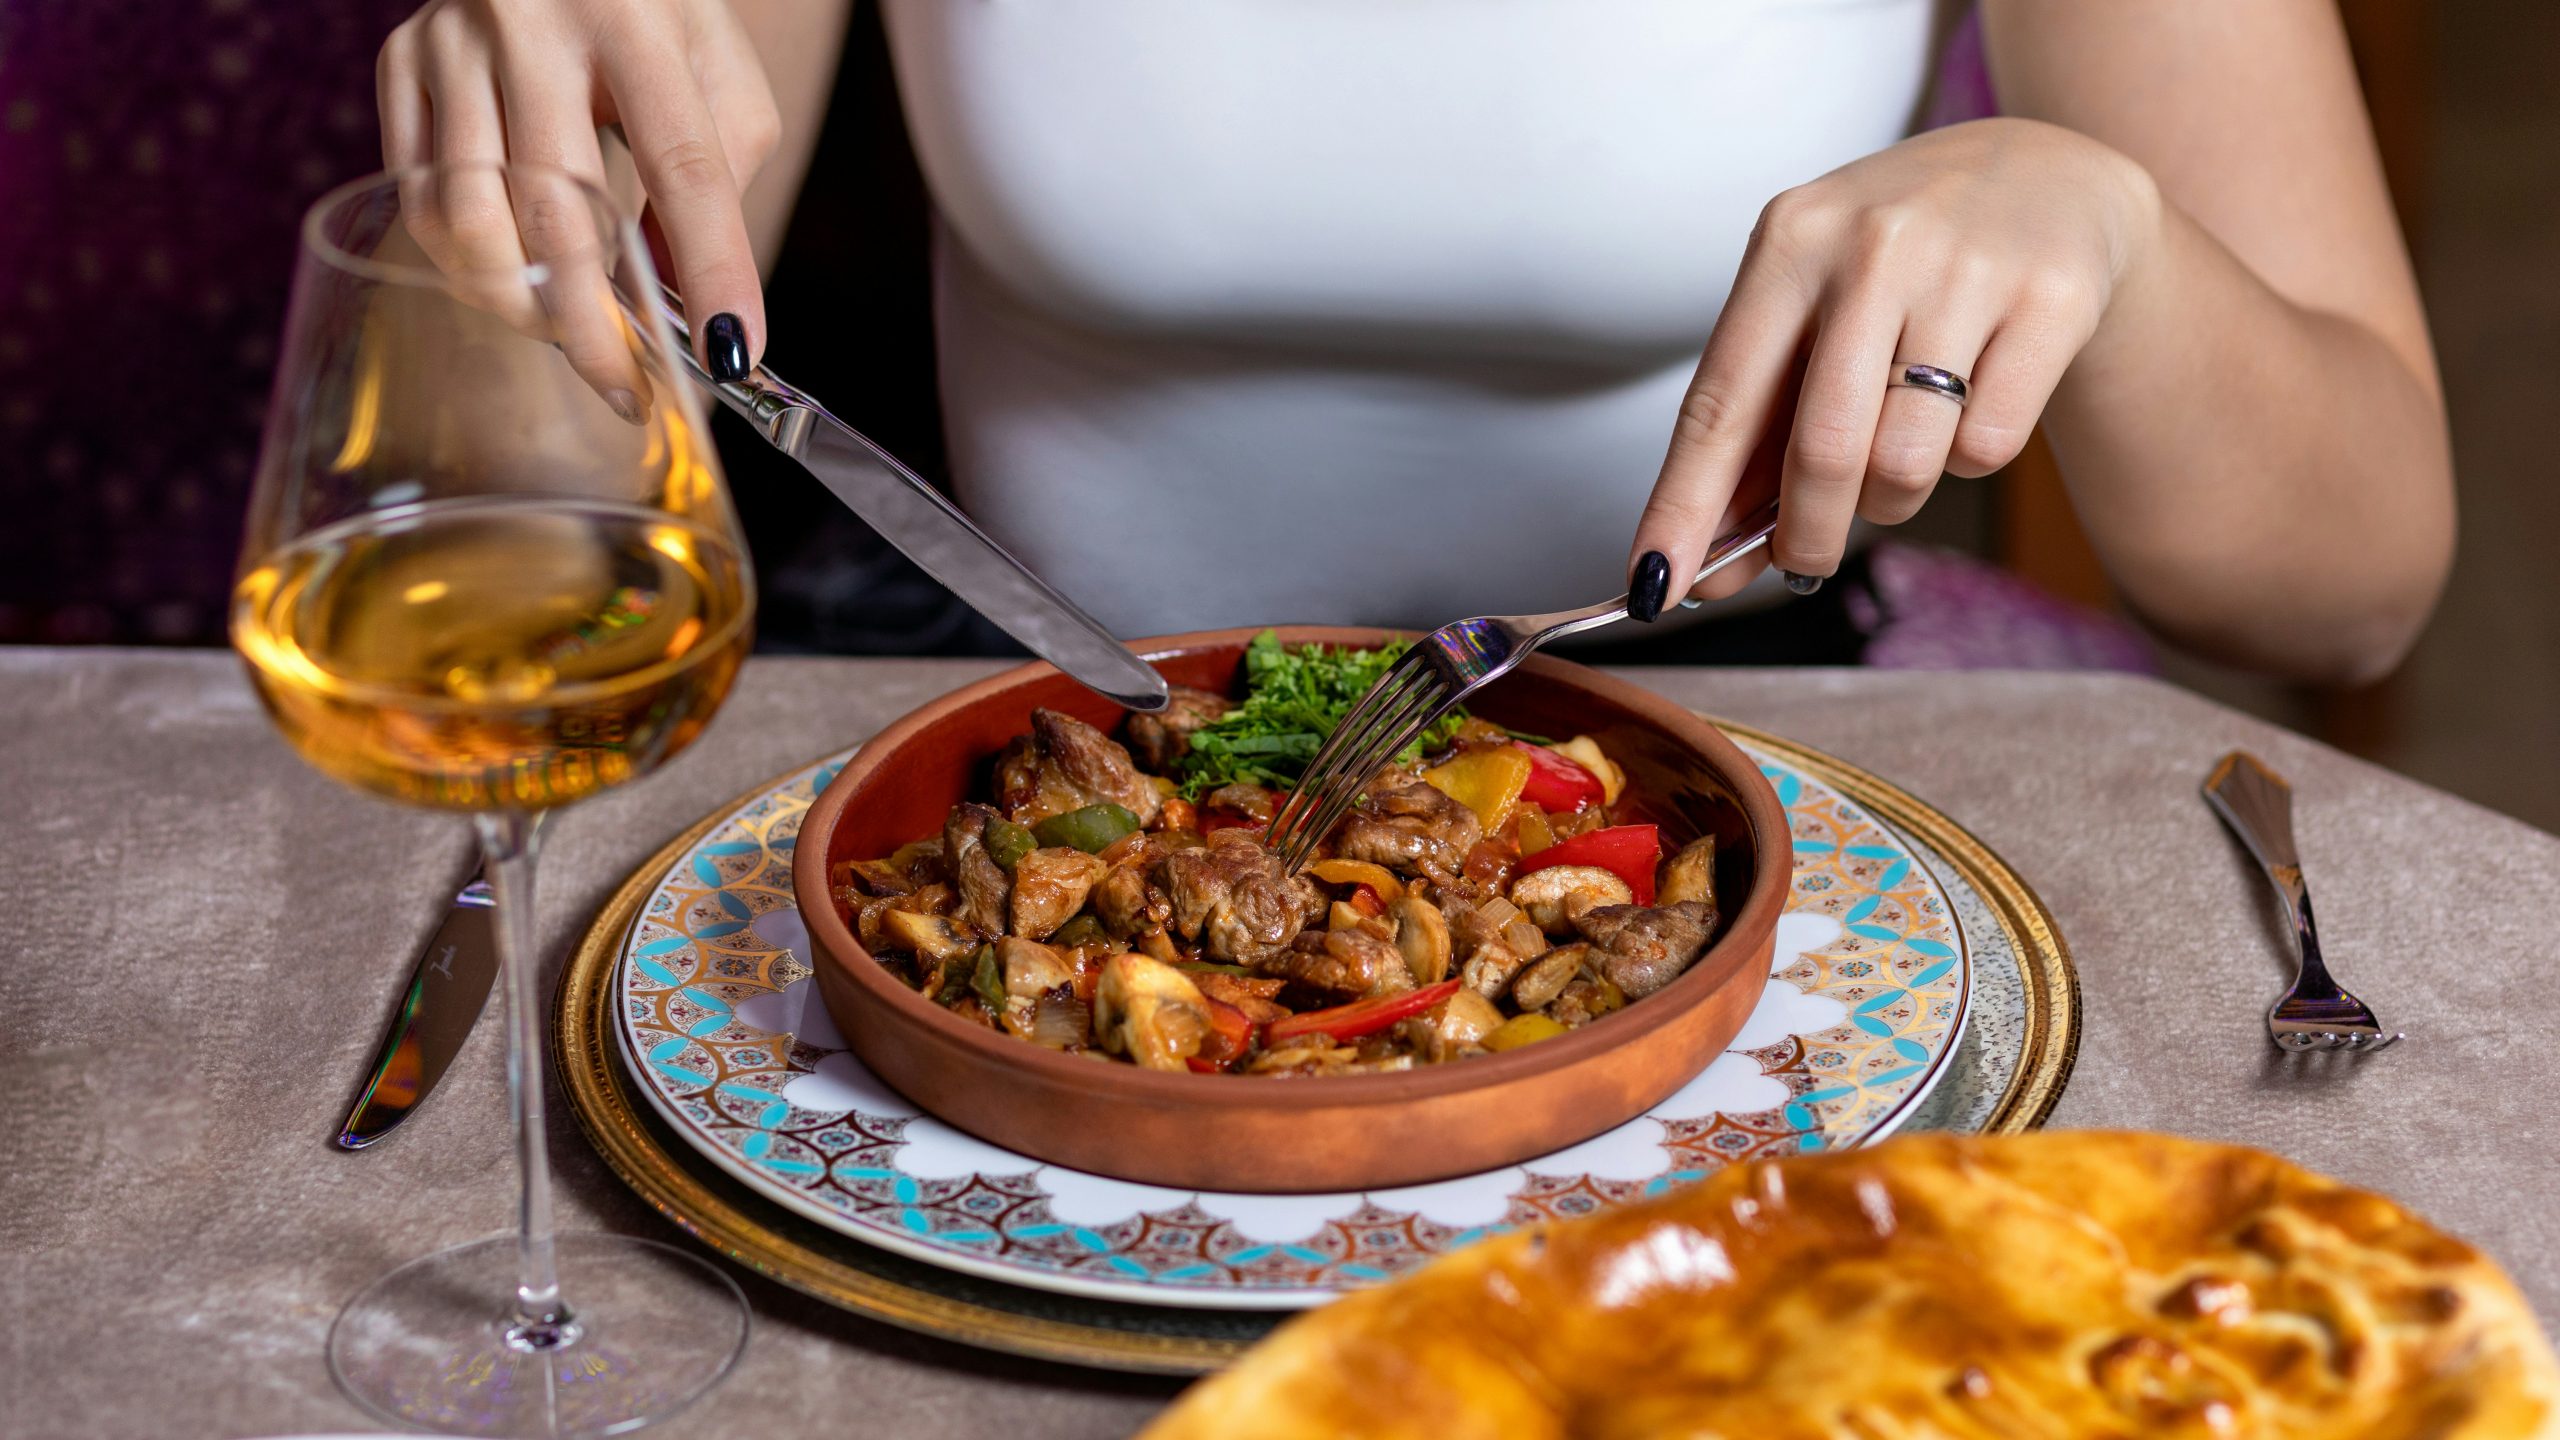 discover the flavors of middle eastern cuisine, from savory kebabs to aromatic rice dishes, that will transport you on a culinary journey through the heart of the middle east.